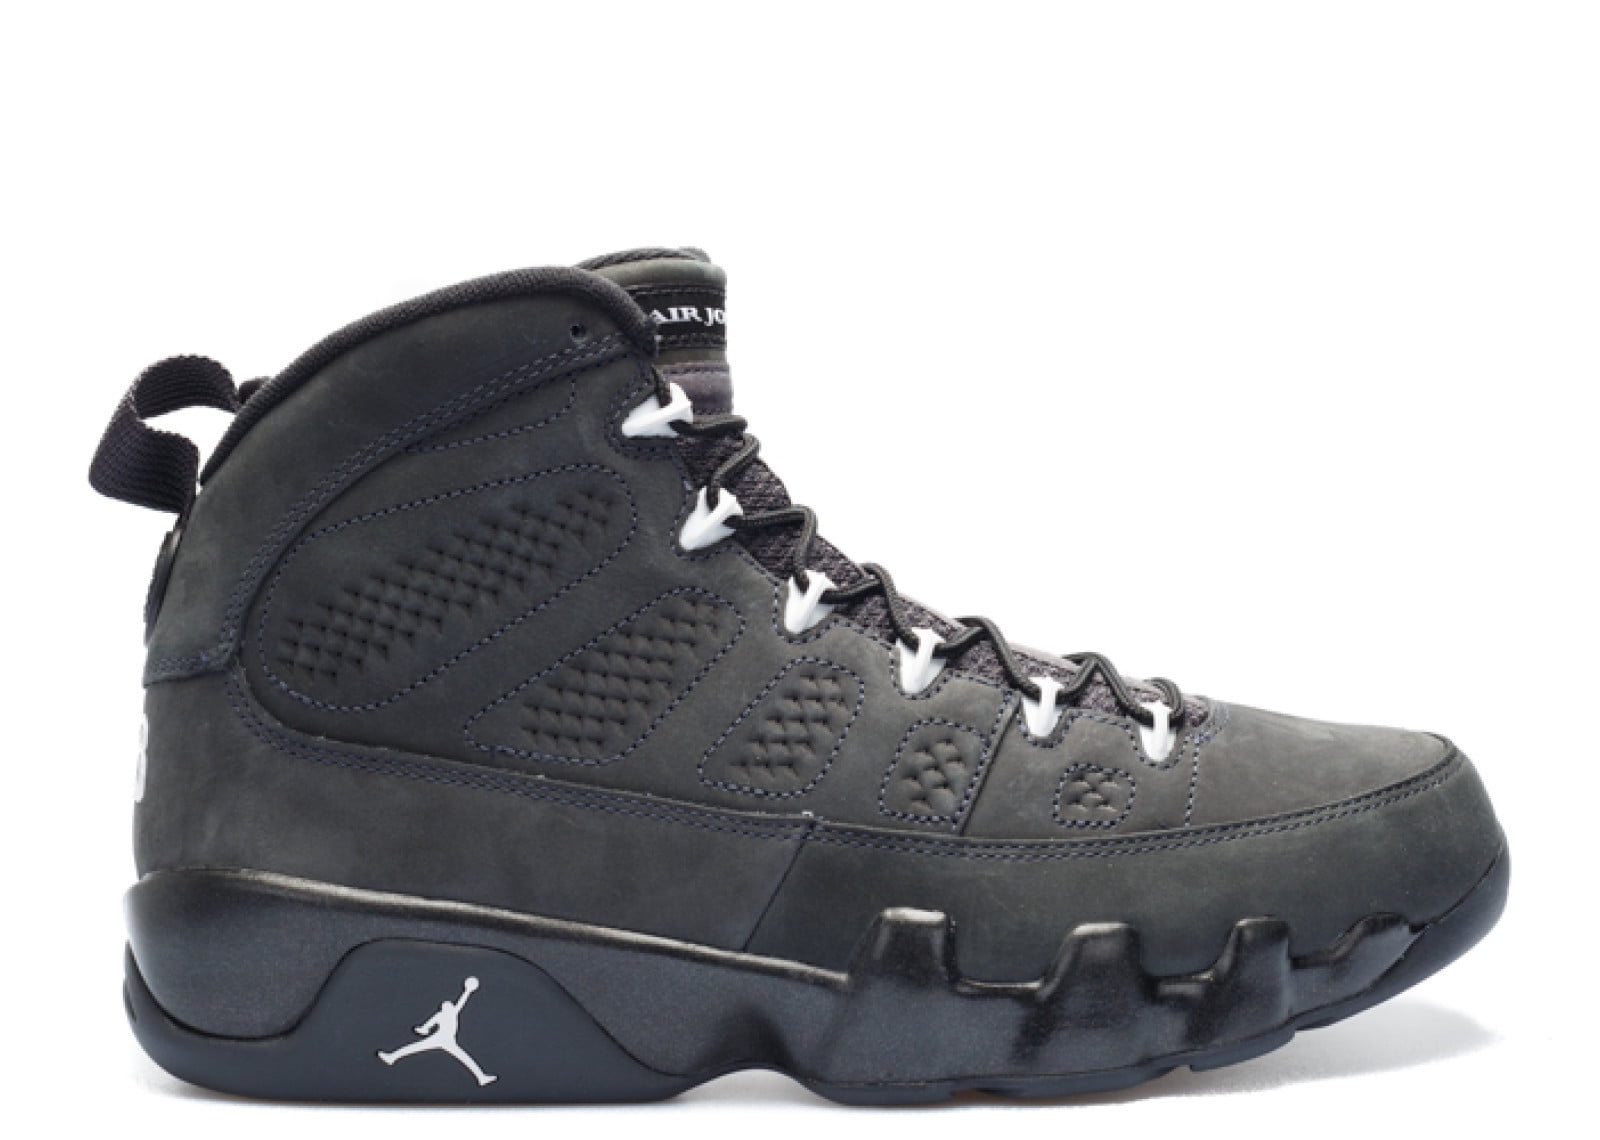 all grey 9s